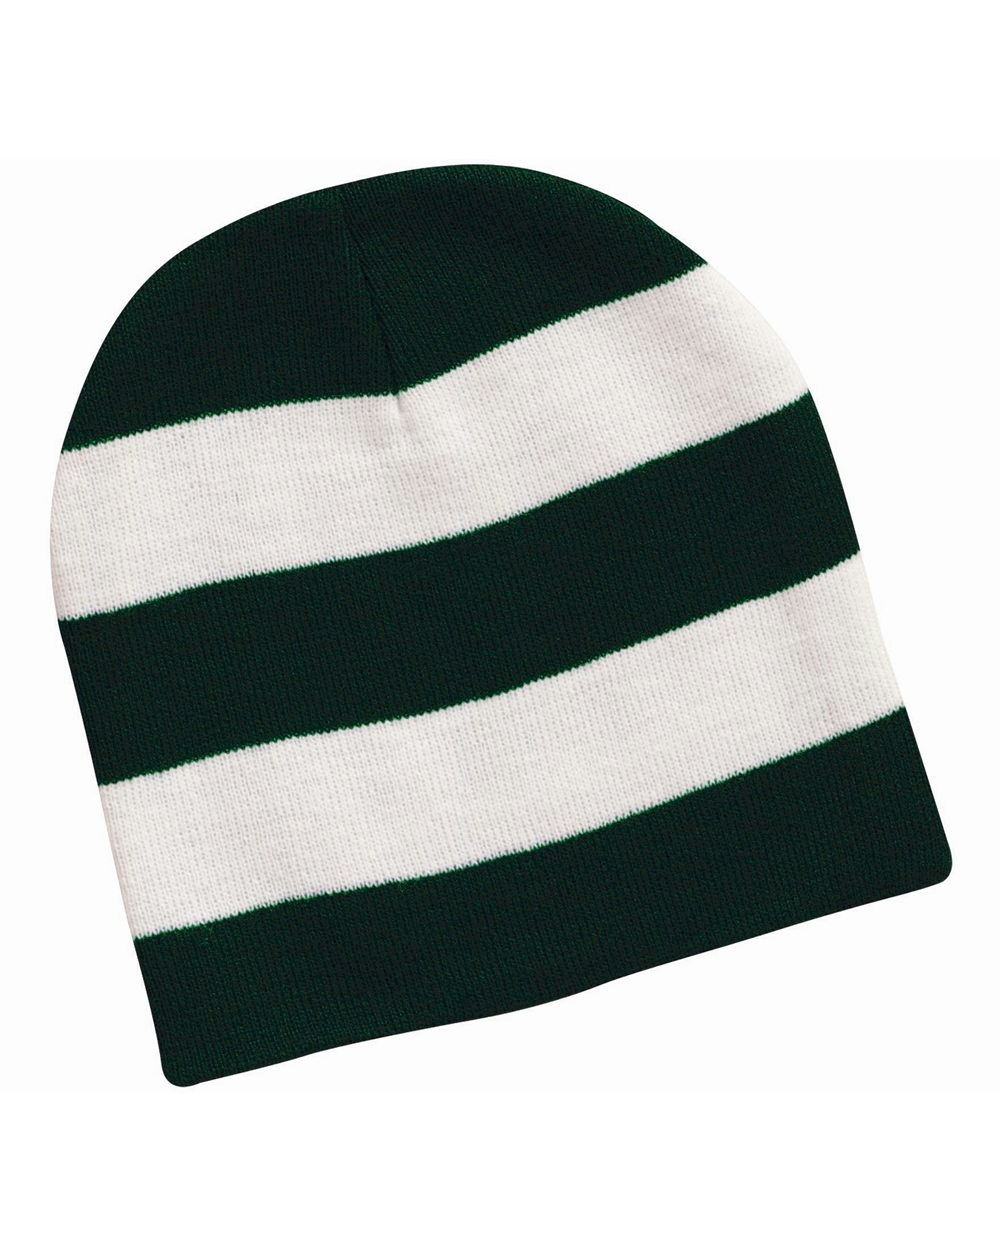 Rugby Striped Knit Beanie Embroidery Blanks - Forest/White